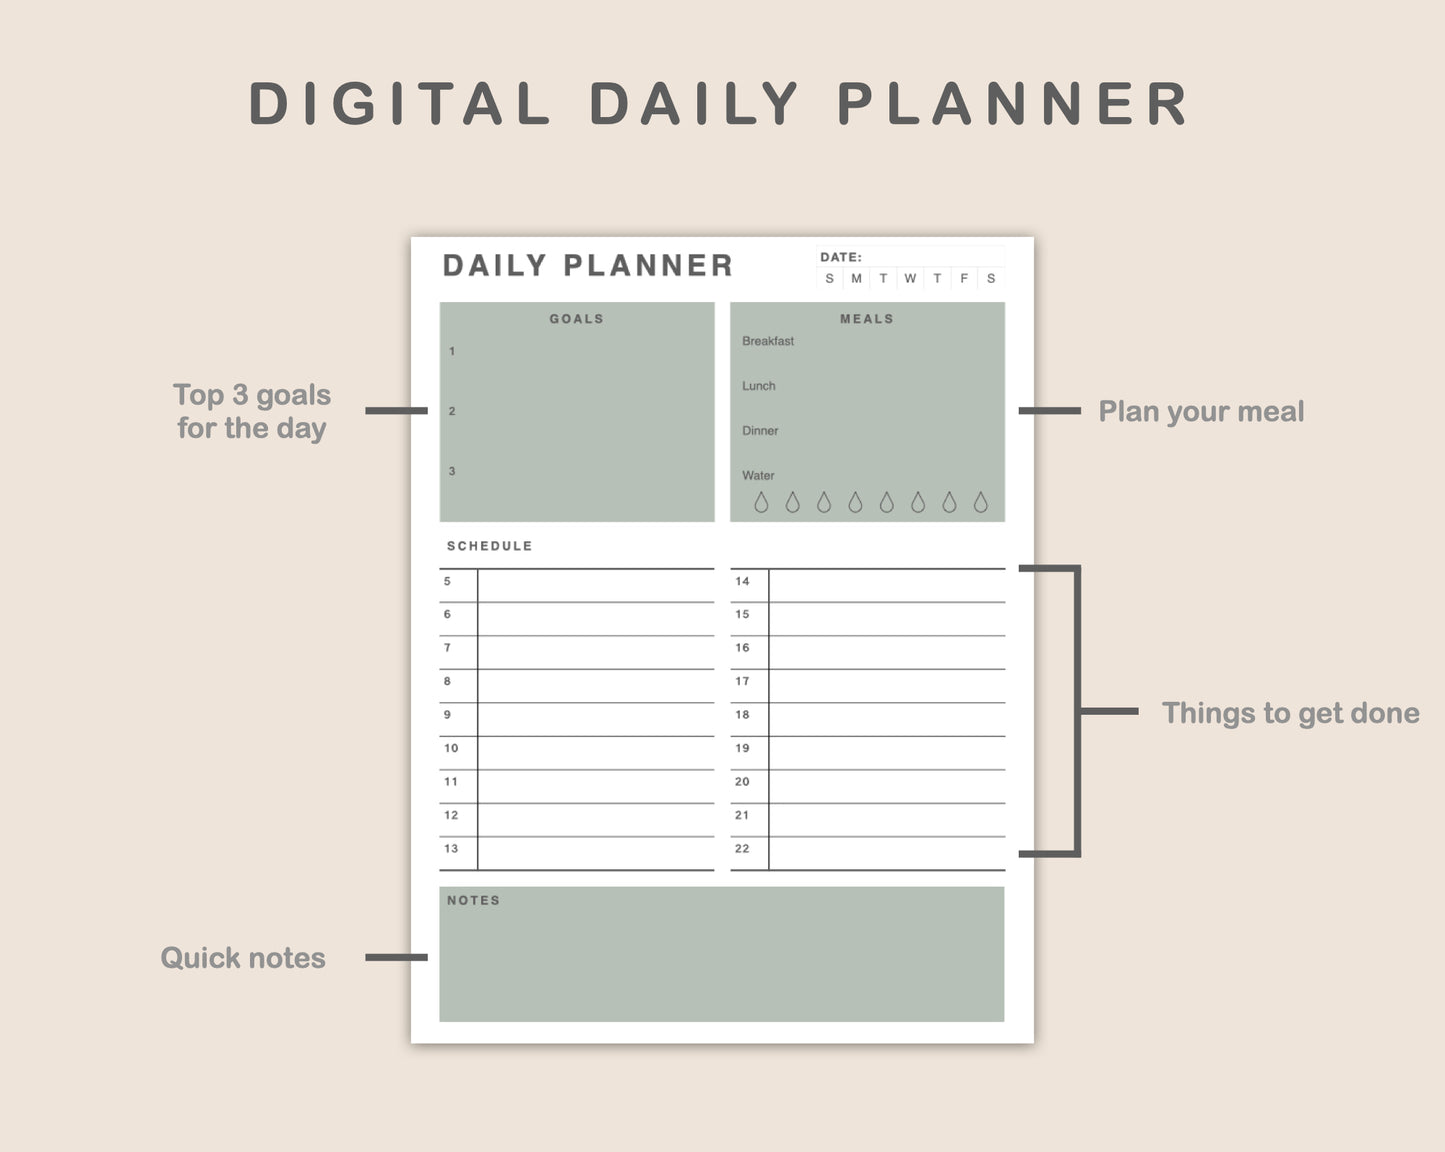 Daily Planner, Meal Planner - Portrait